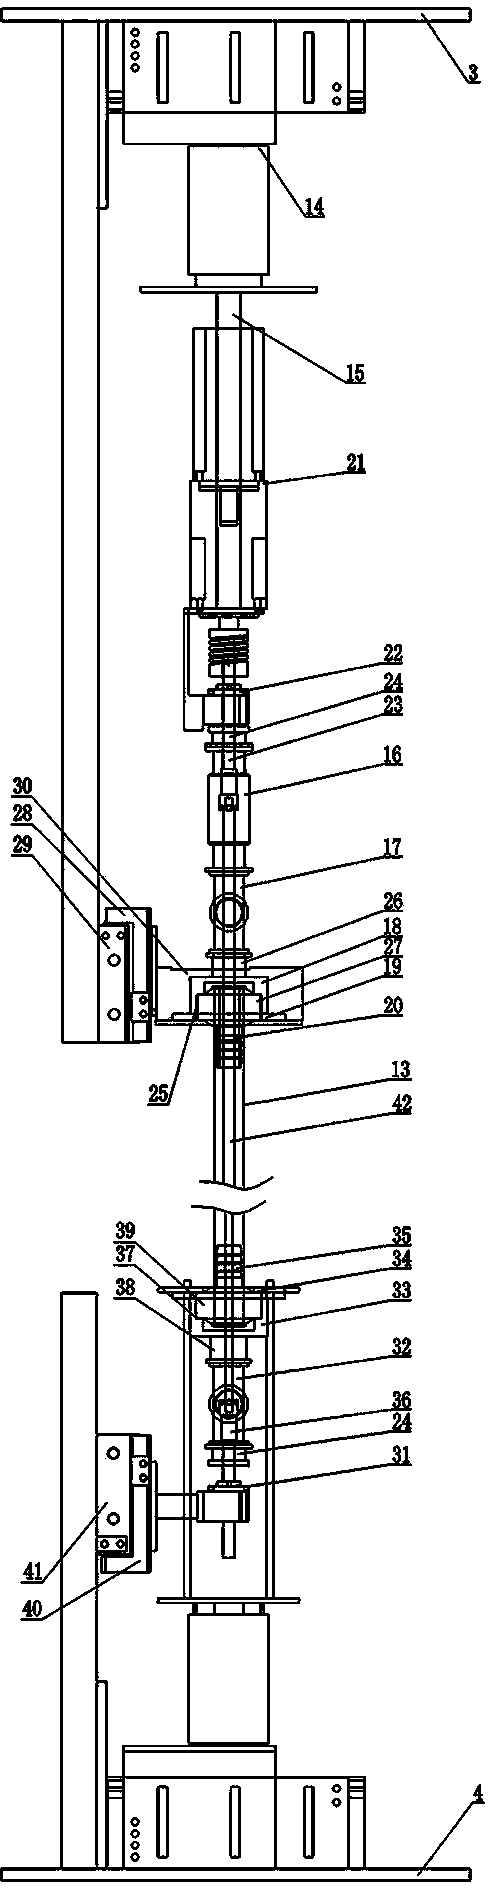 Deepwater drilling condition based marine riser mechanical behavior experiment simulation system and experiment method